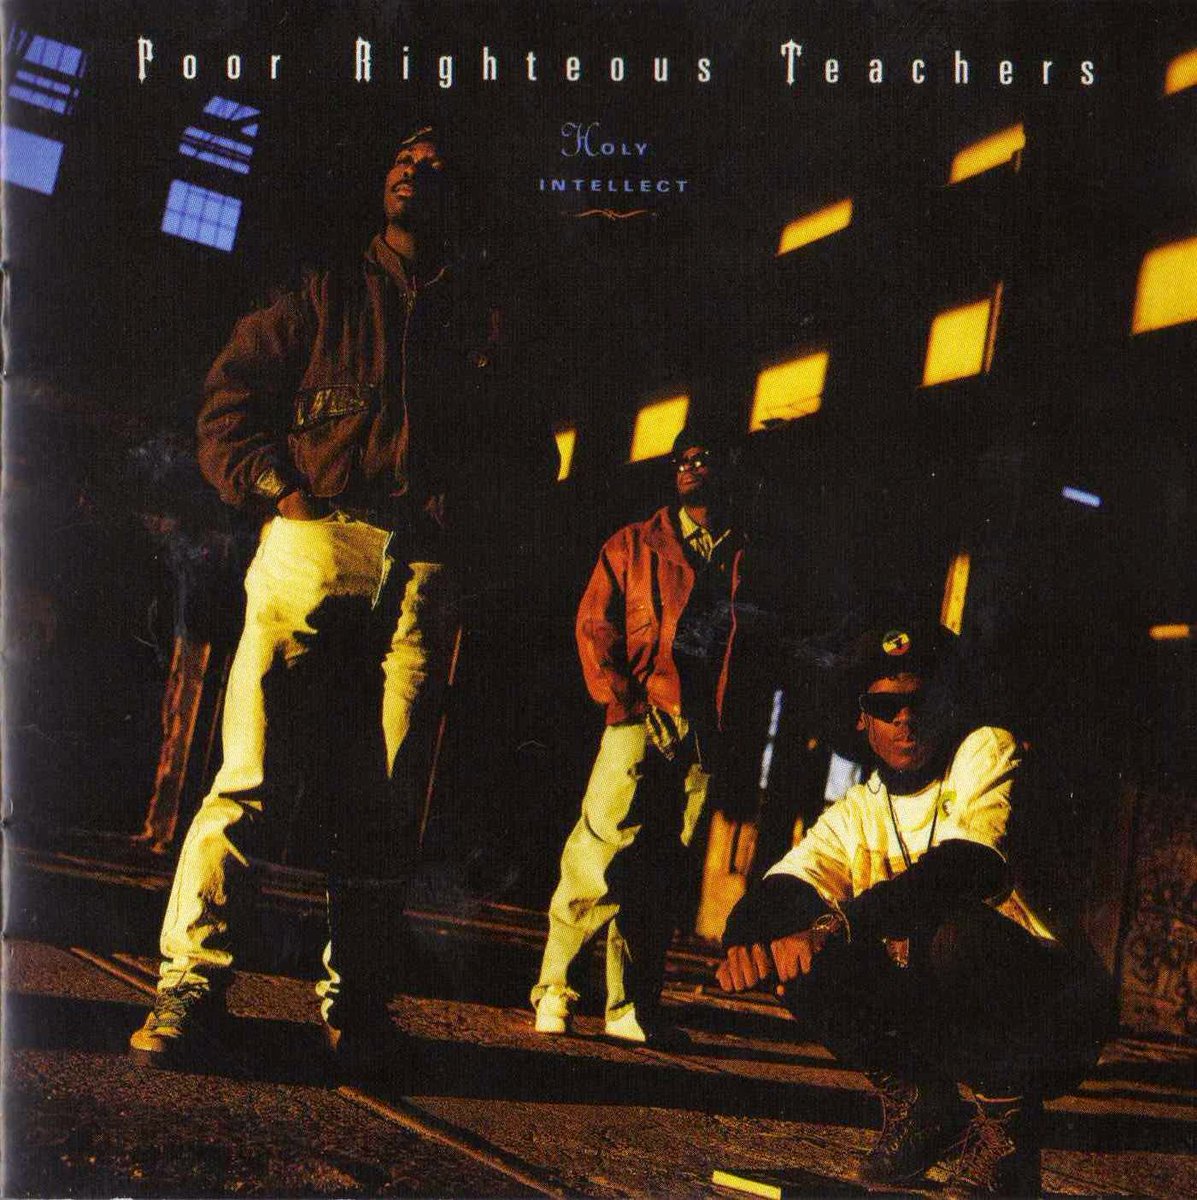 May 29, 1990: The Poor Righteous Teachers debut with their classic LP “Holy Intellect”.
#OGLegacy #holyintellect #poorrighteousteachers #wiseintelligent #culturefreedom #fathershaheed #ripfathershaheed #rockdisfunkyjoint #newjerseyhiphop #hiphop #oldschoolhiphop #goldenagehiphop